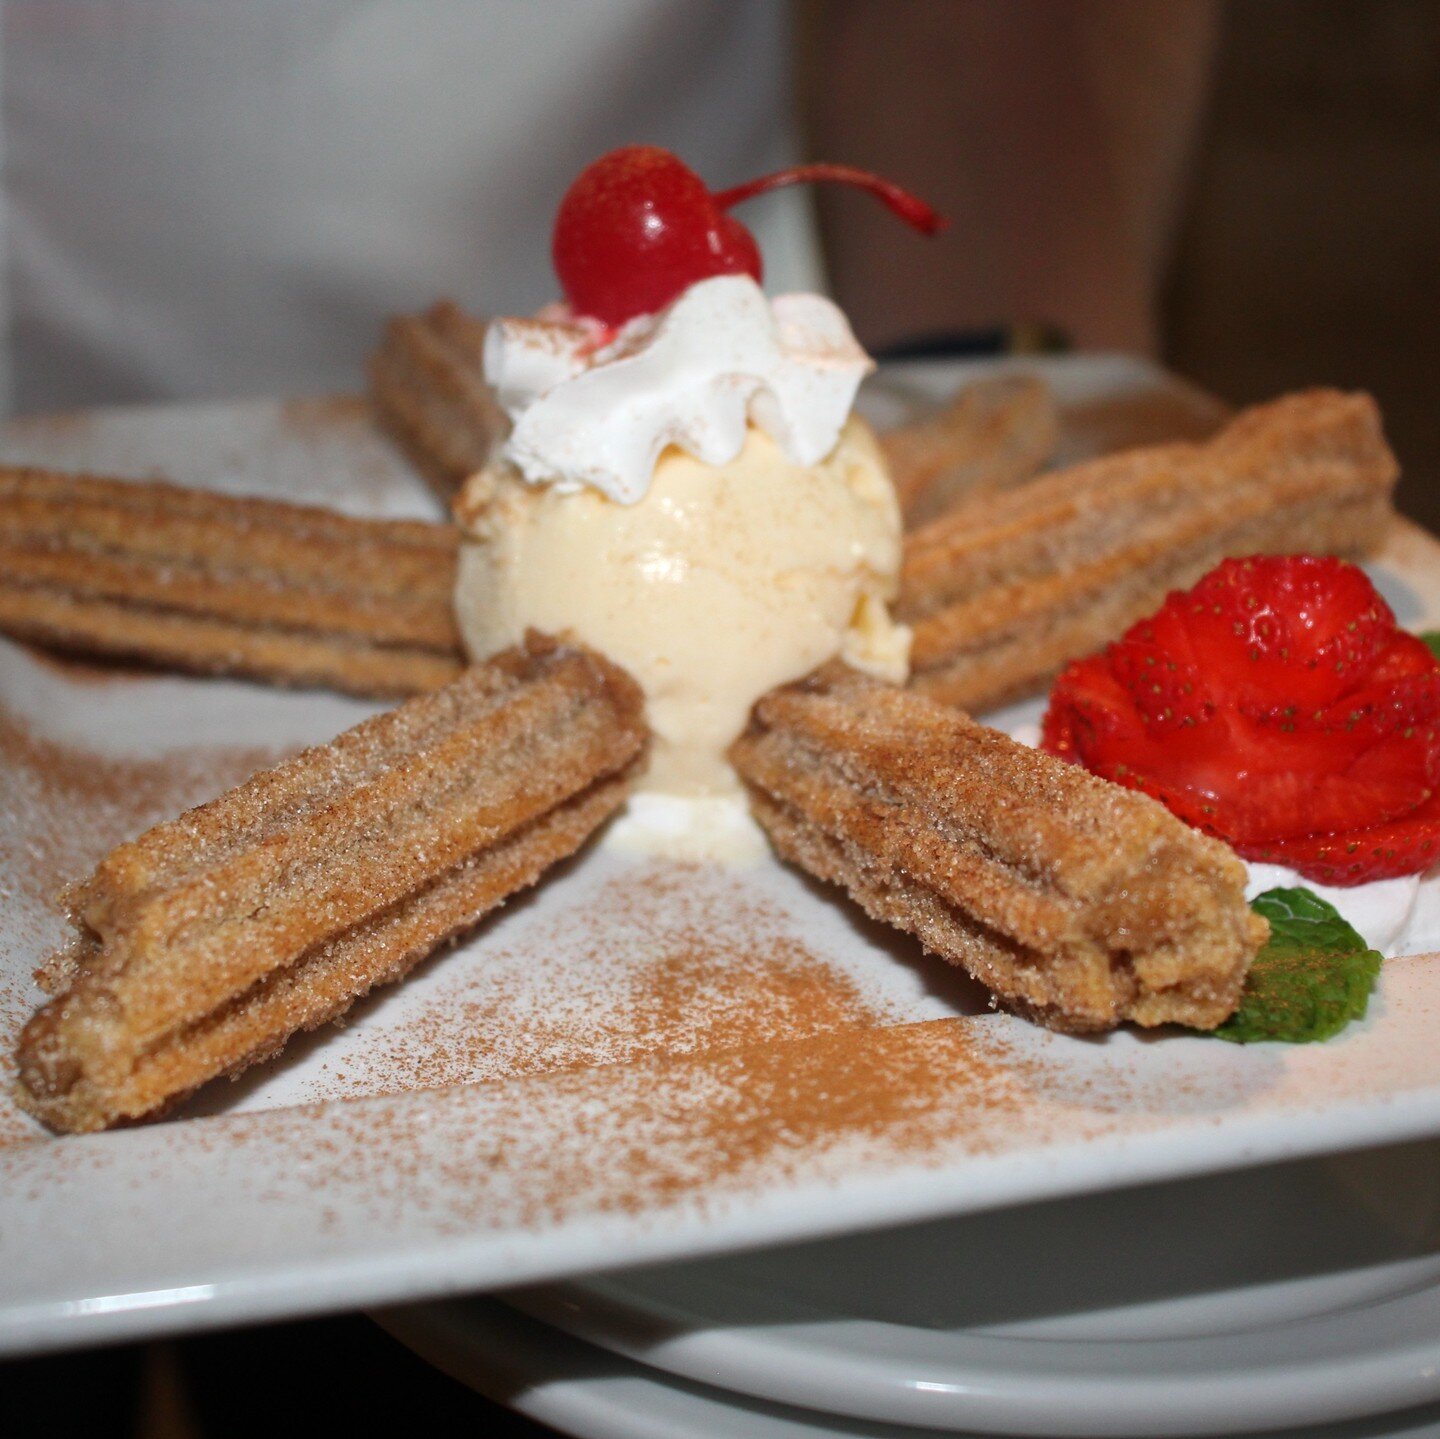 Indulge in a midweek treat with our irresistible churros! Our warm, crispy churros paired with vanilla ice cream is the perfect way to add a little sweetness to your Wednesday.